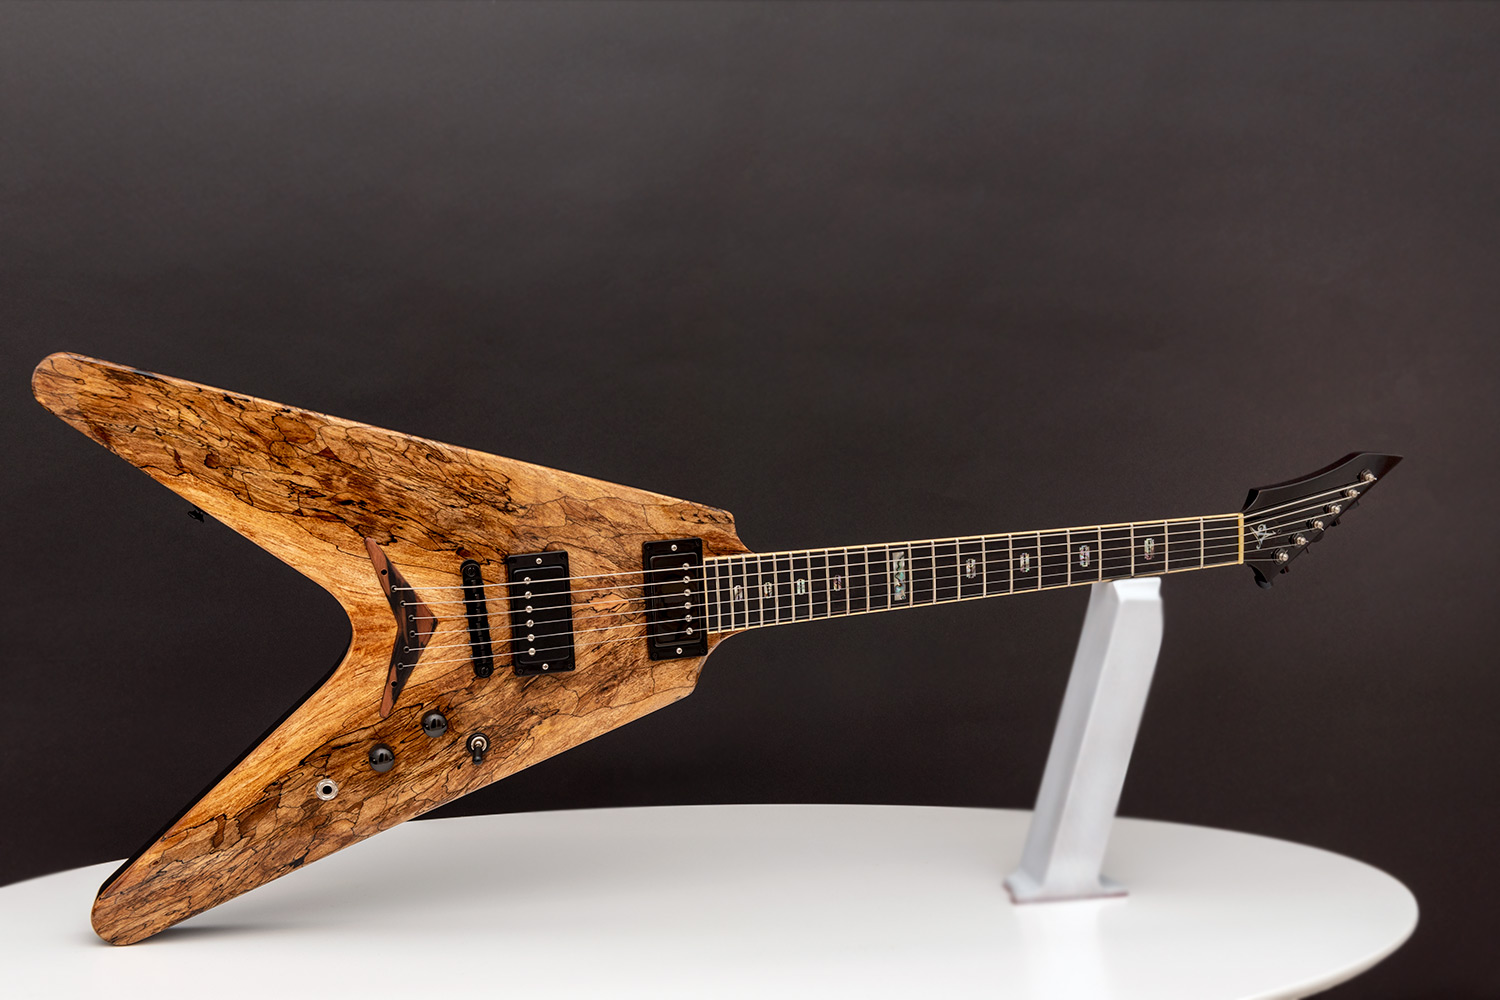 This is a custom guitar, built by a well-known luthier, Augustin Cristian Apostol (@ Avatar2100). Her name is Razor